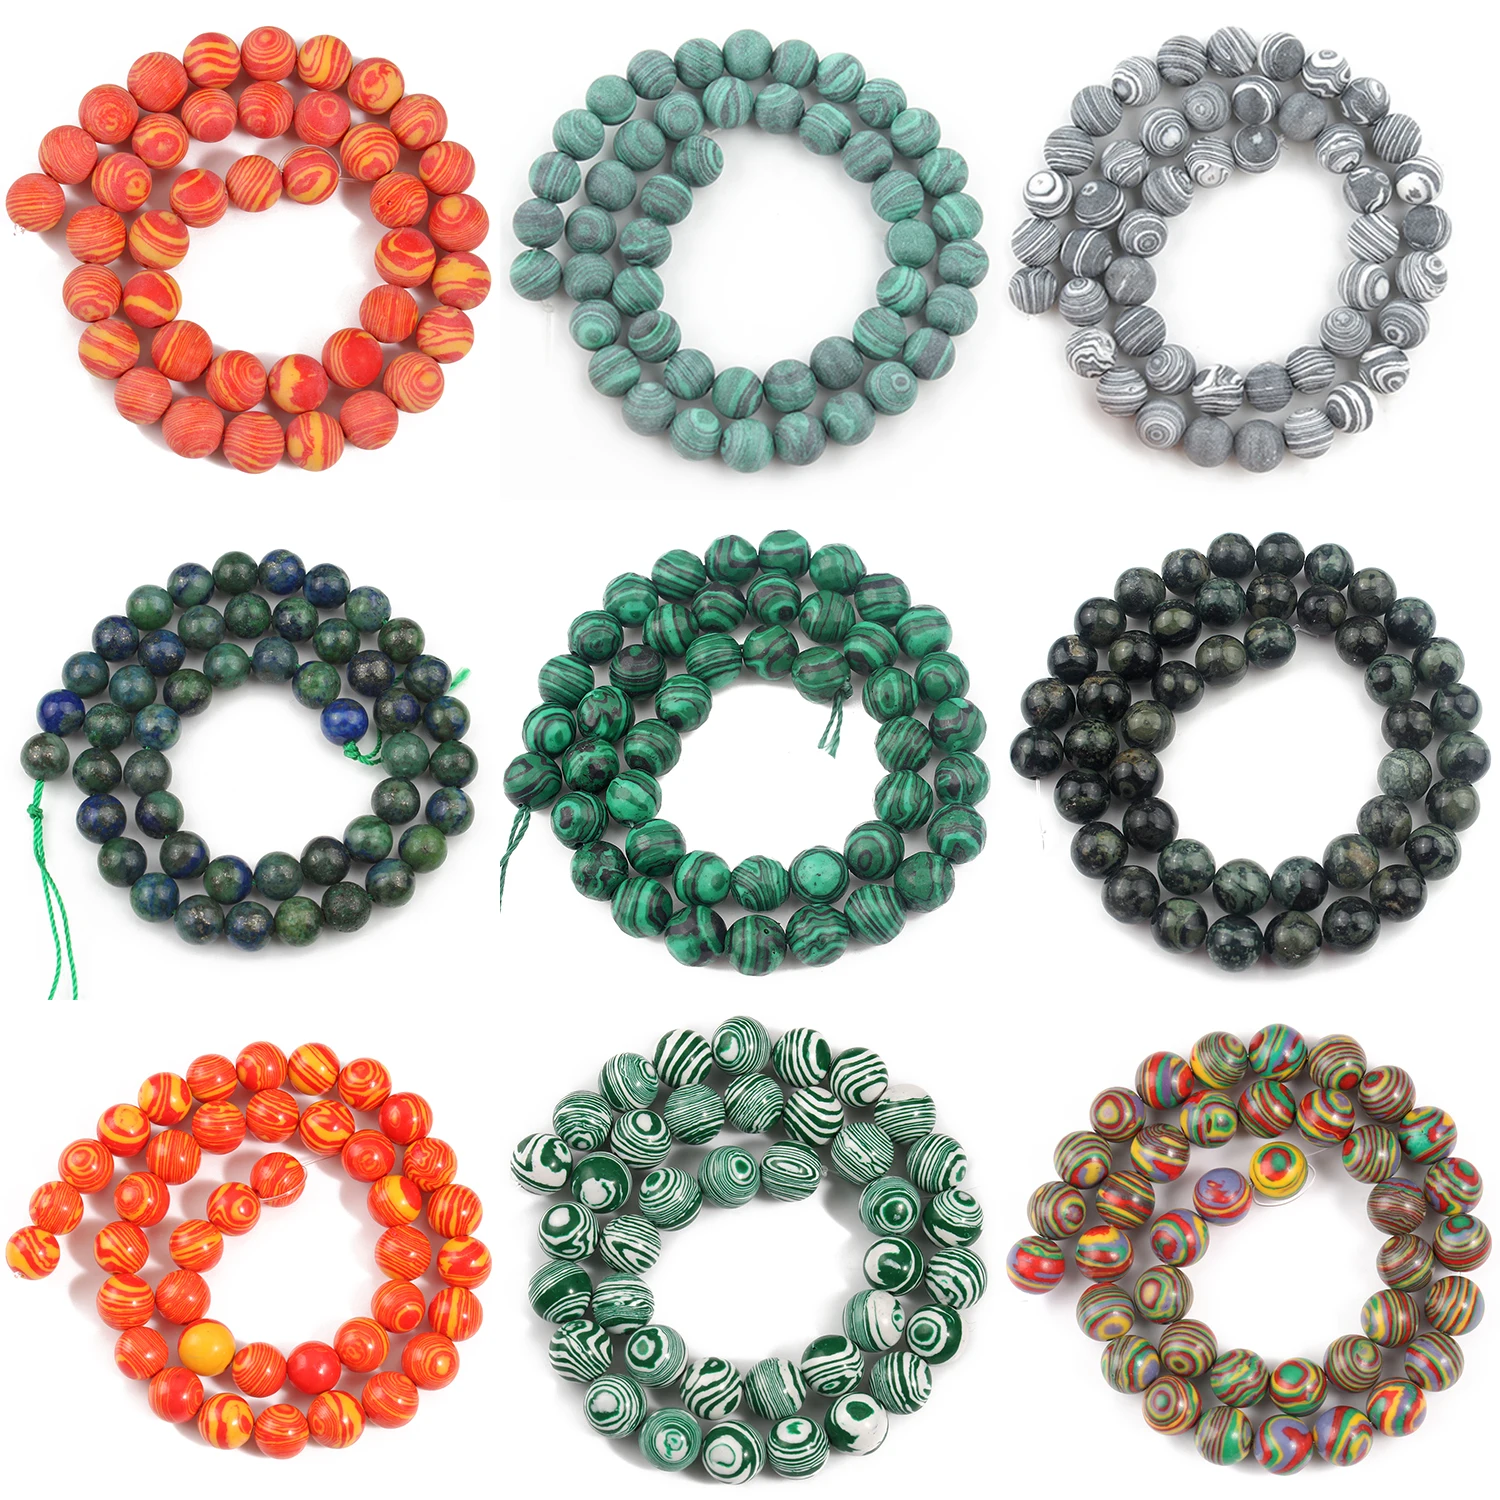 

Wholesale Natural Stone Malachite Beads Matte/Smooth Loose Spacer Beads For Jewelry Making DIY Bracelets Necklace 4/6/8/10/12mm